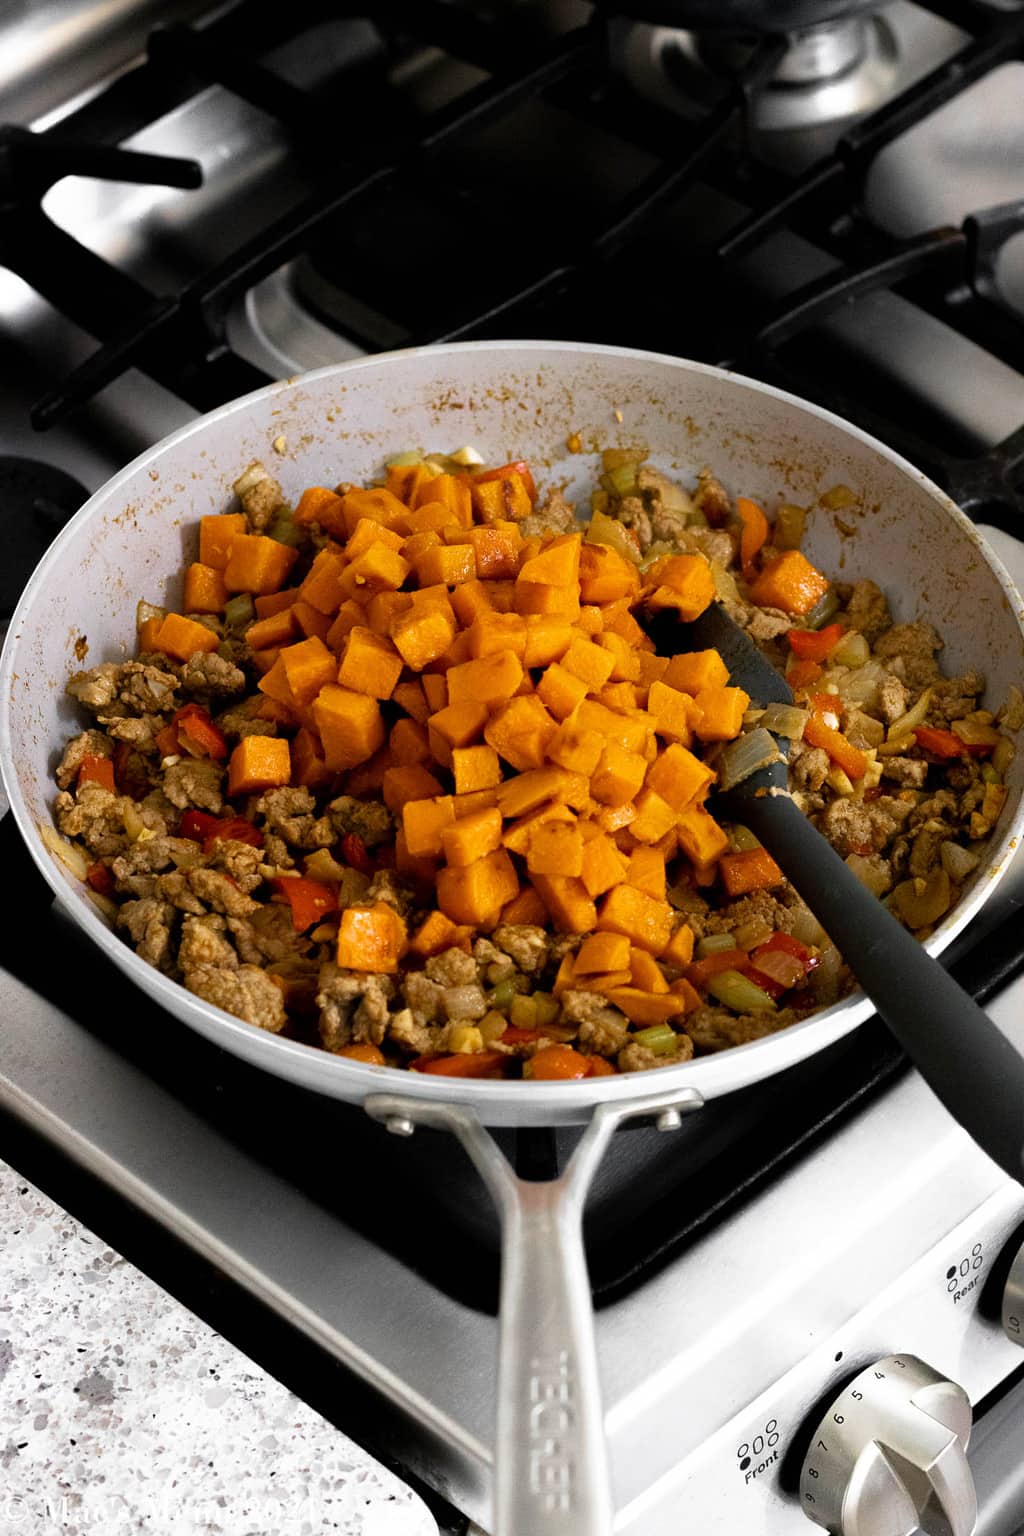 A side angled shot of a skillet of the ground turkey with sweet potatoes.